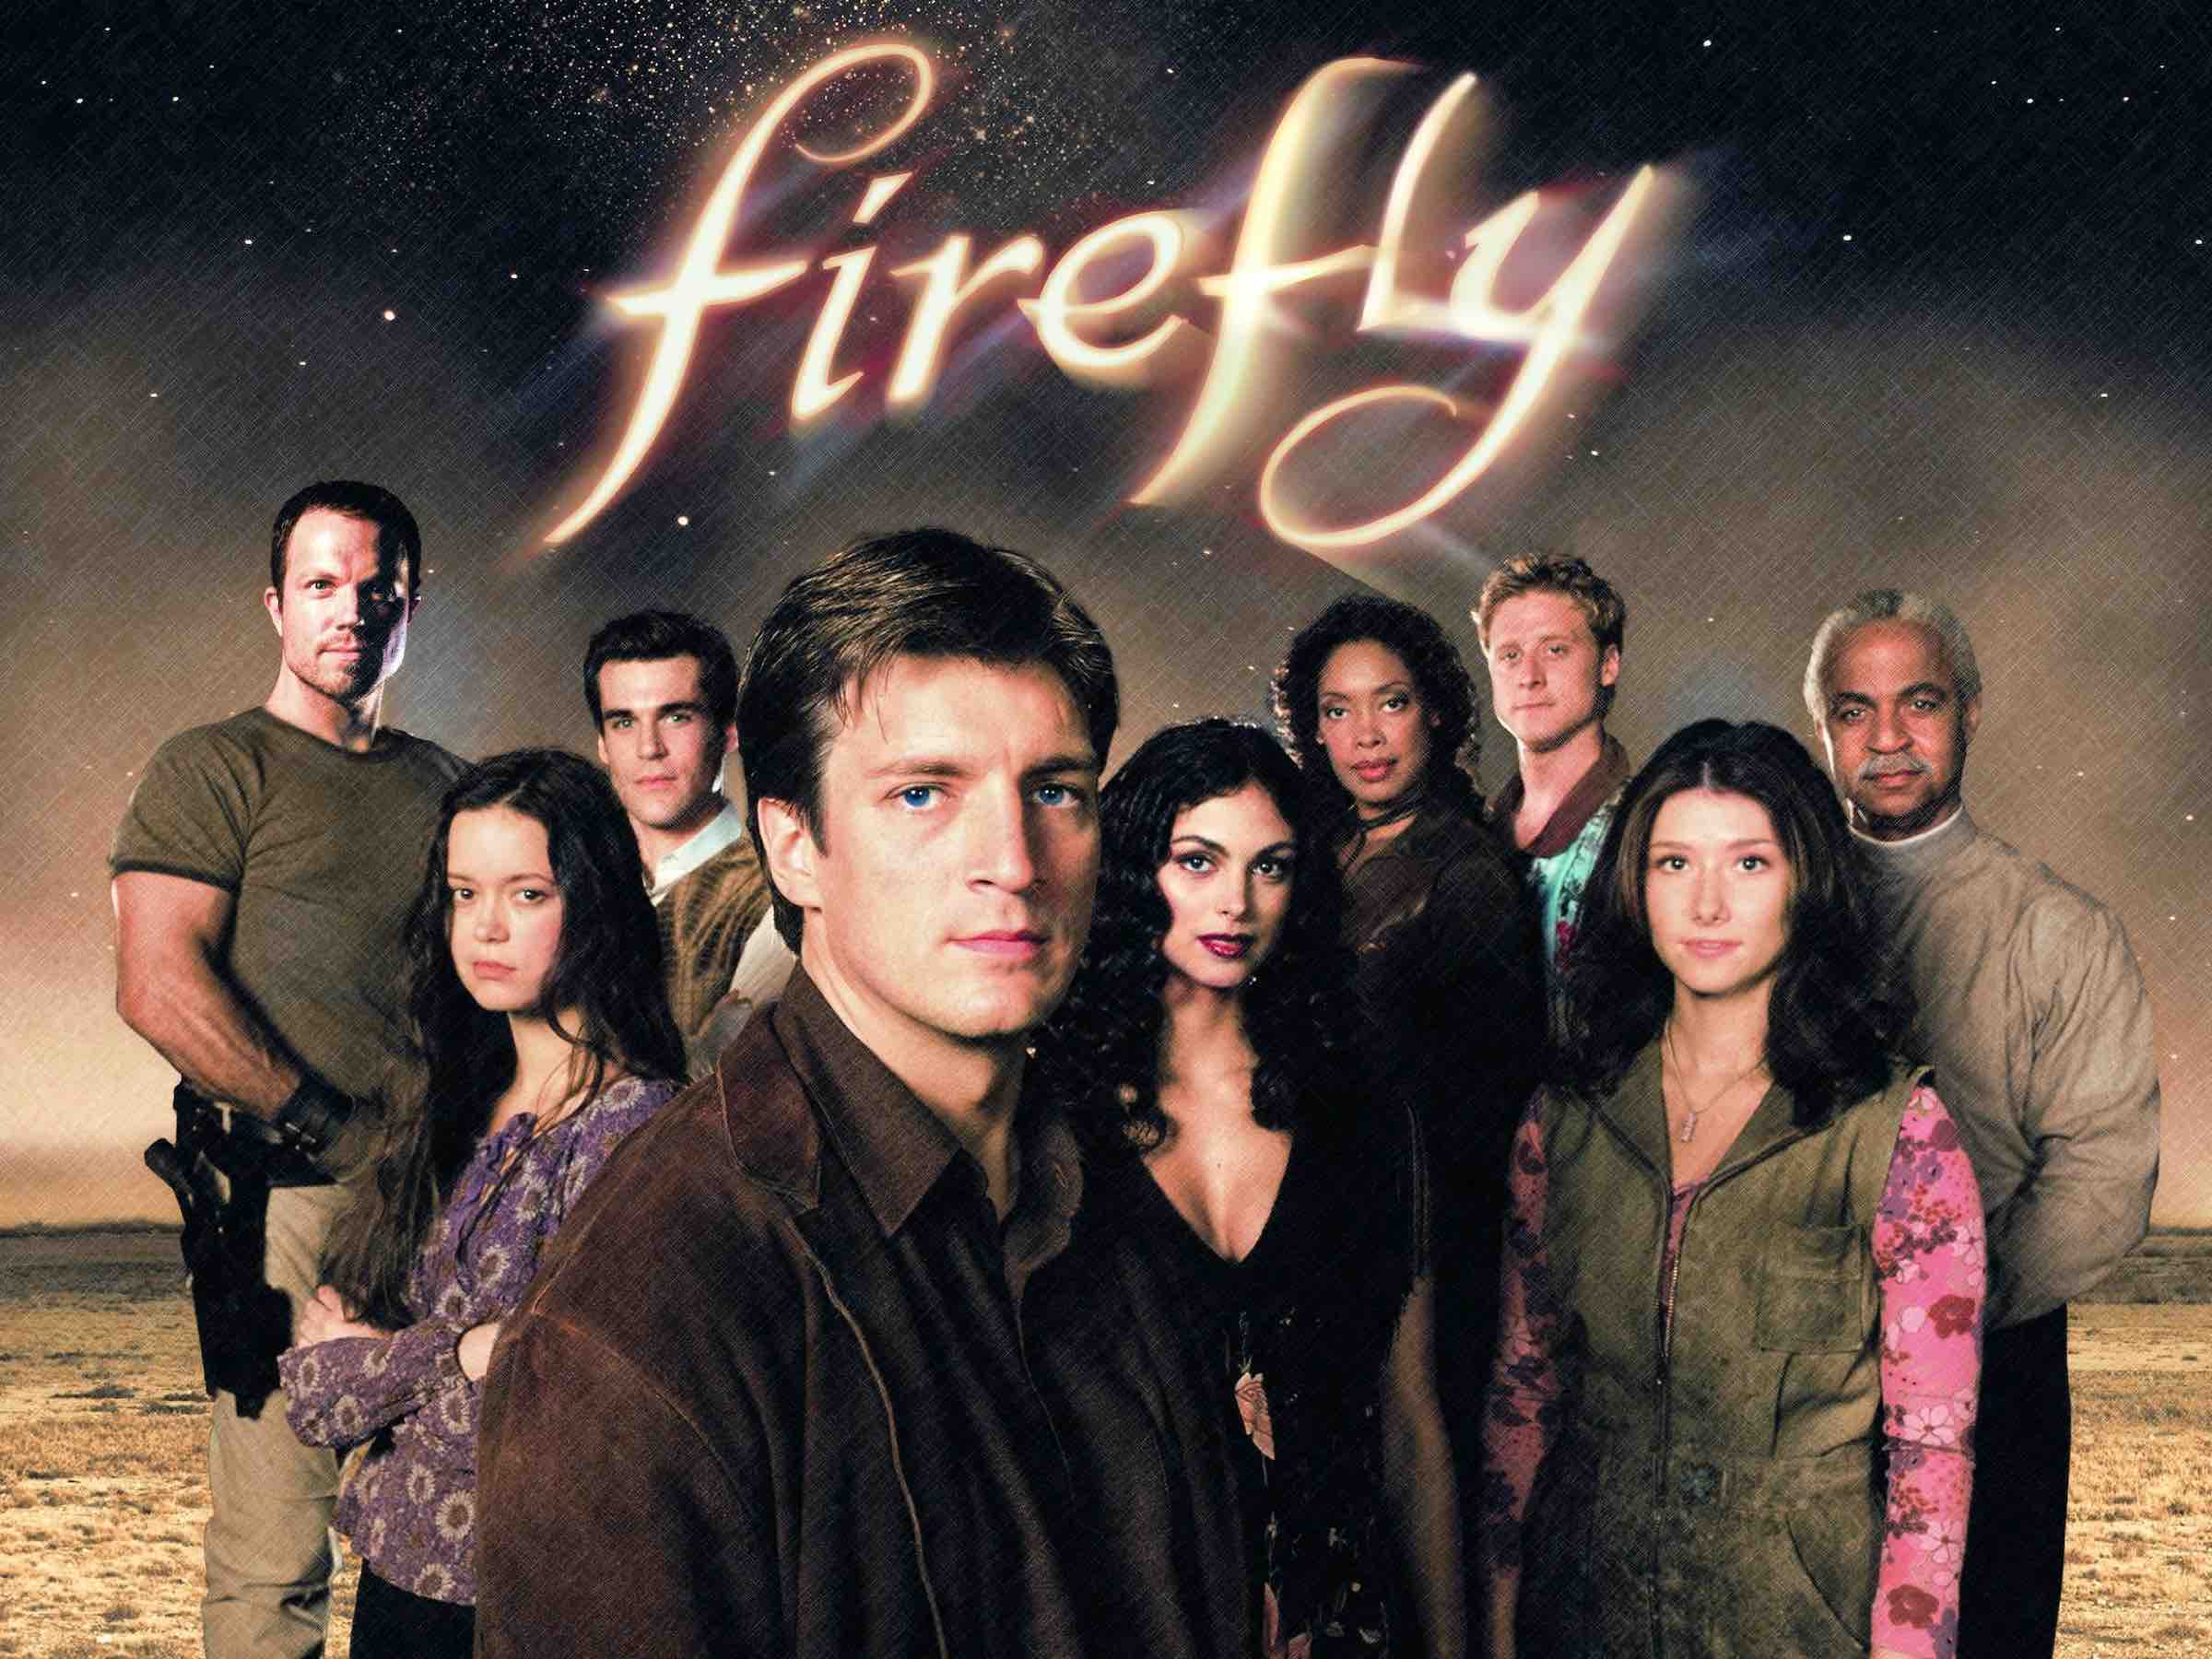 'Firefly' is an all time cult show. Do you have what it takes to ace our quiz and join the rest of the 'Firefly' crew?